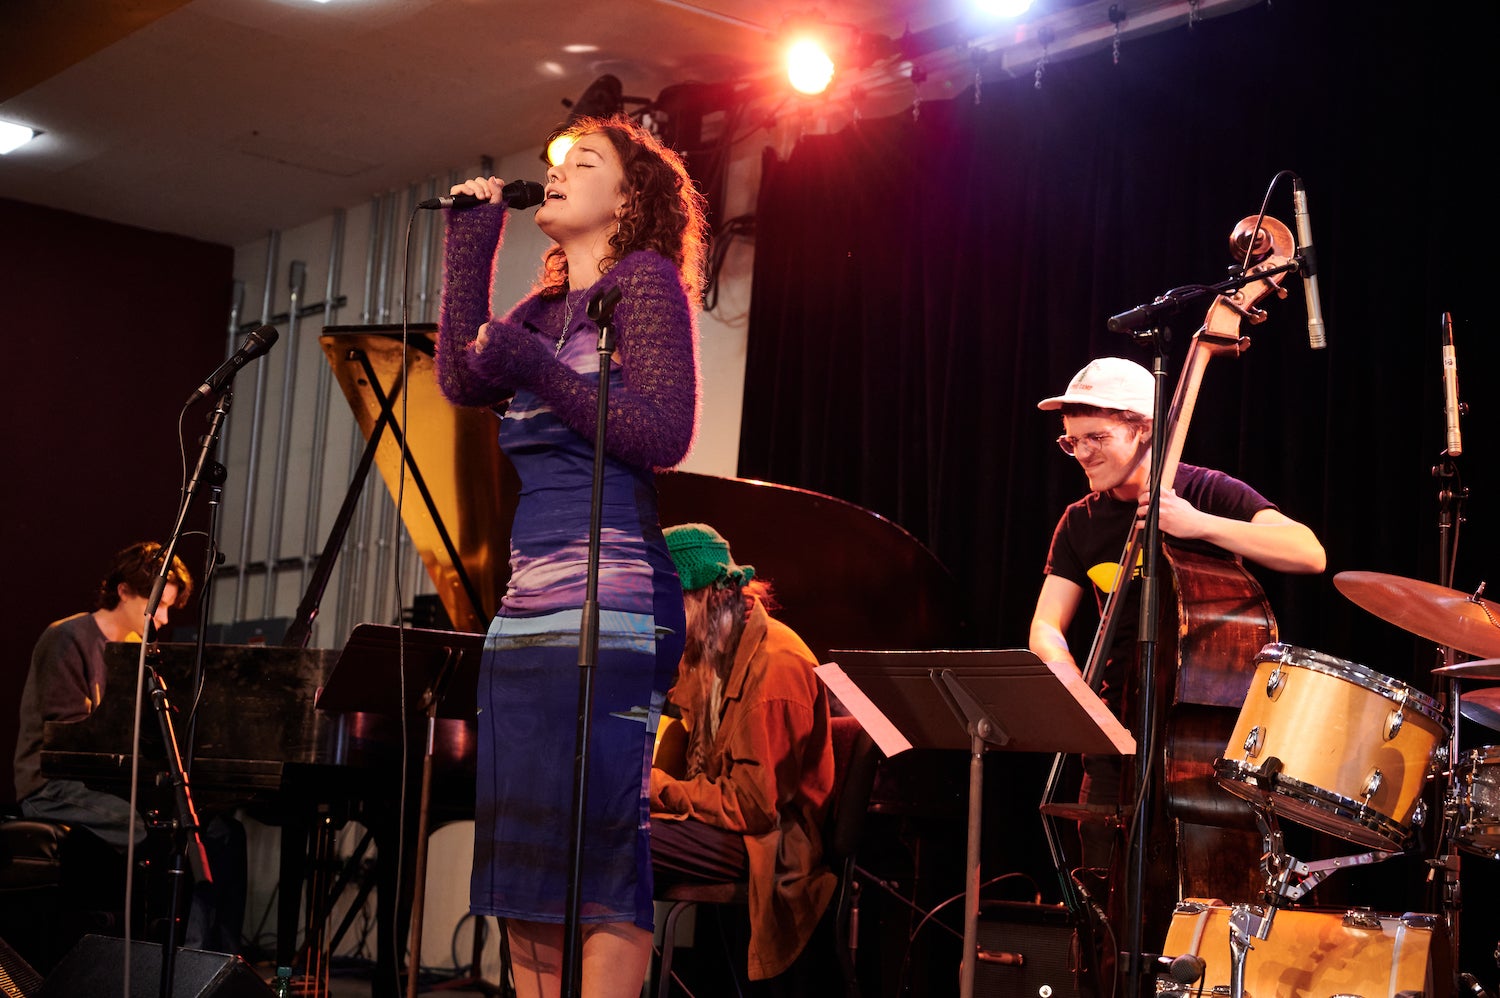 jazz quintet with lead singer performing